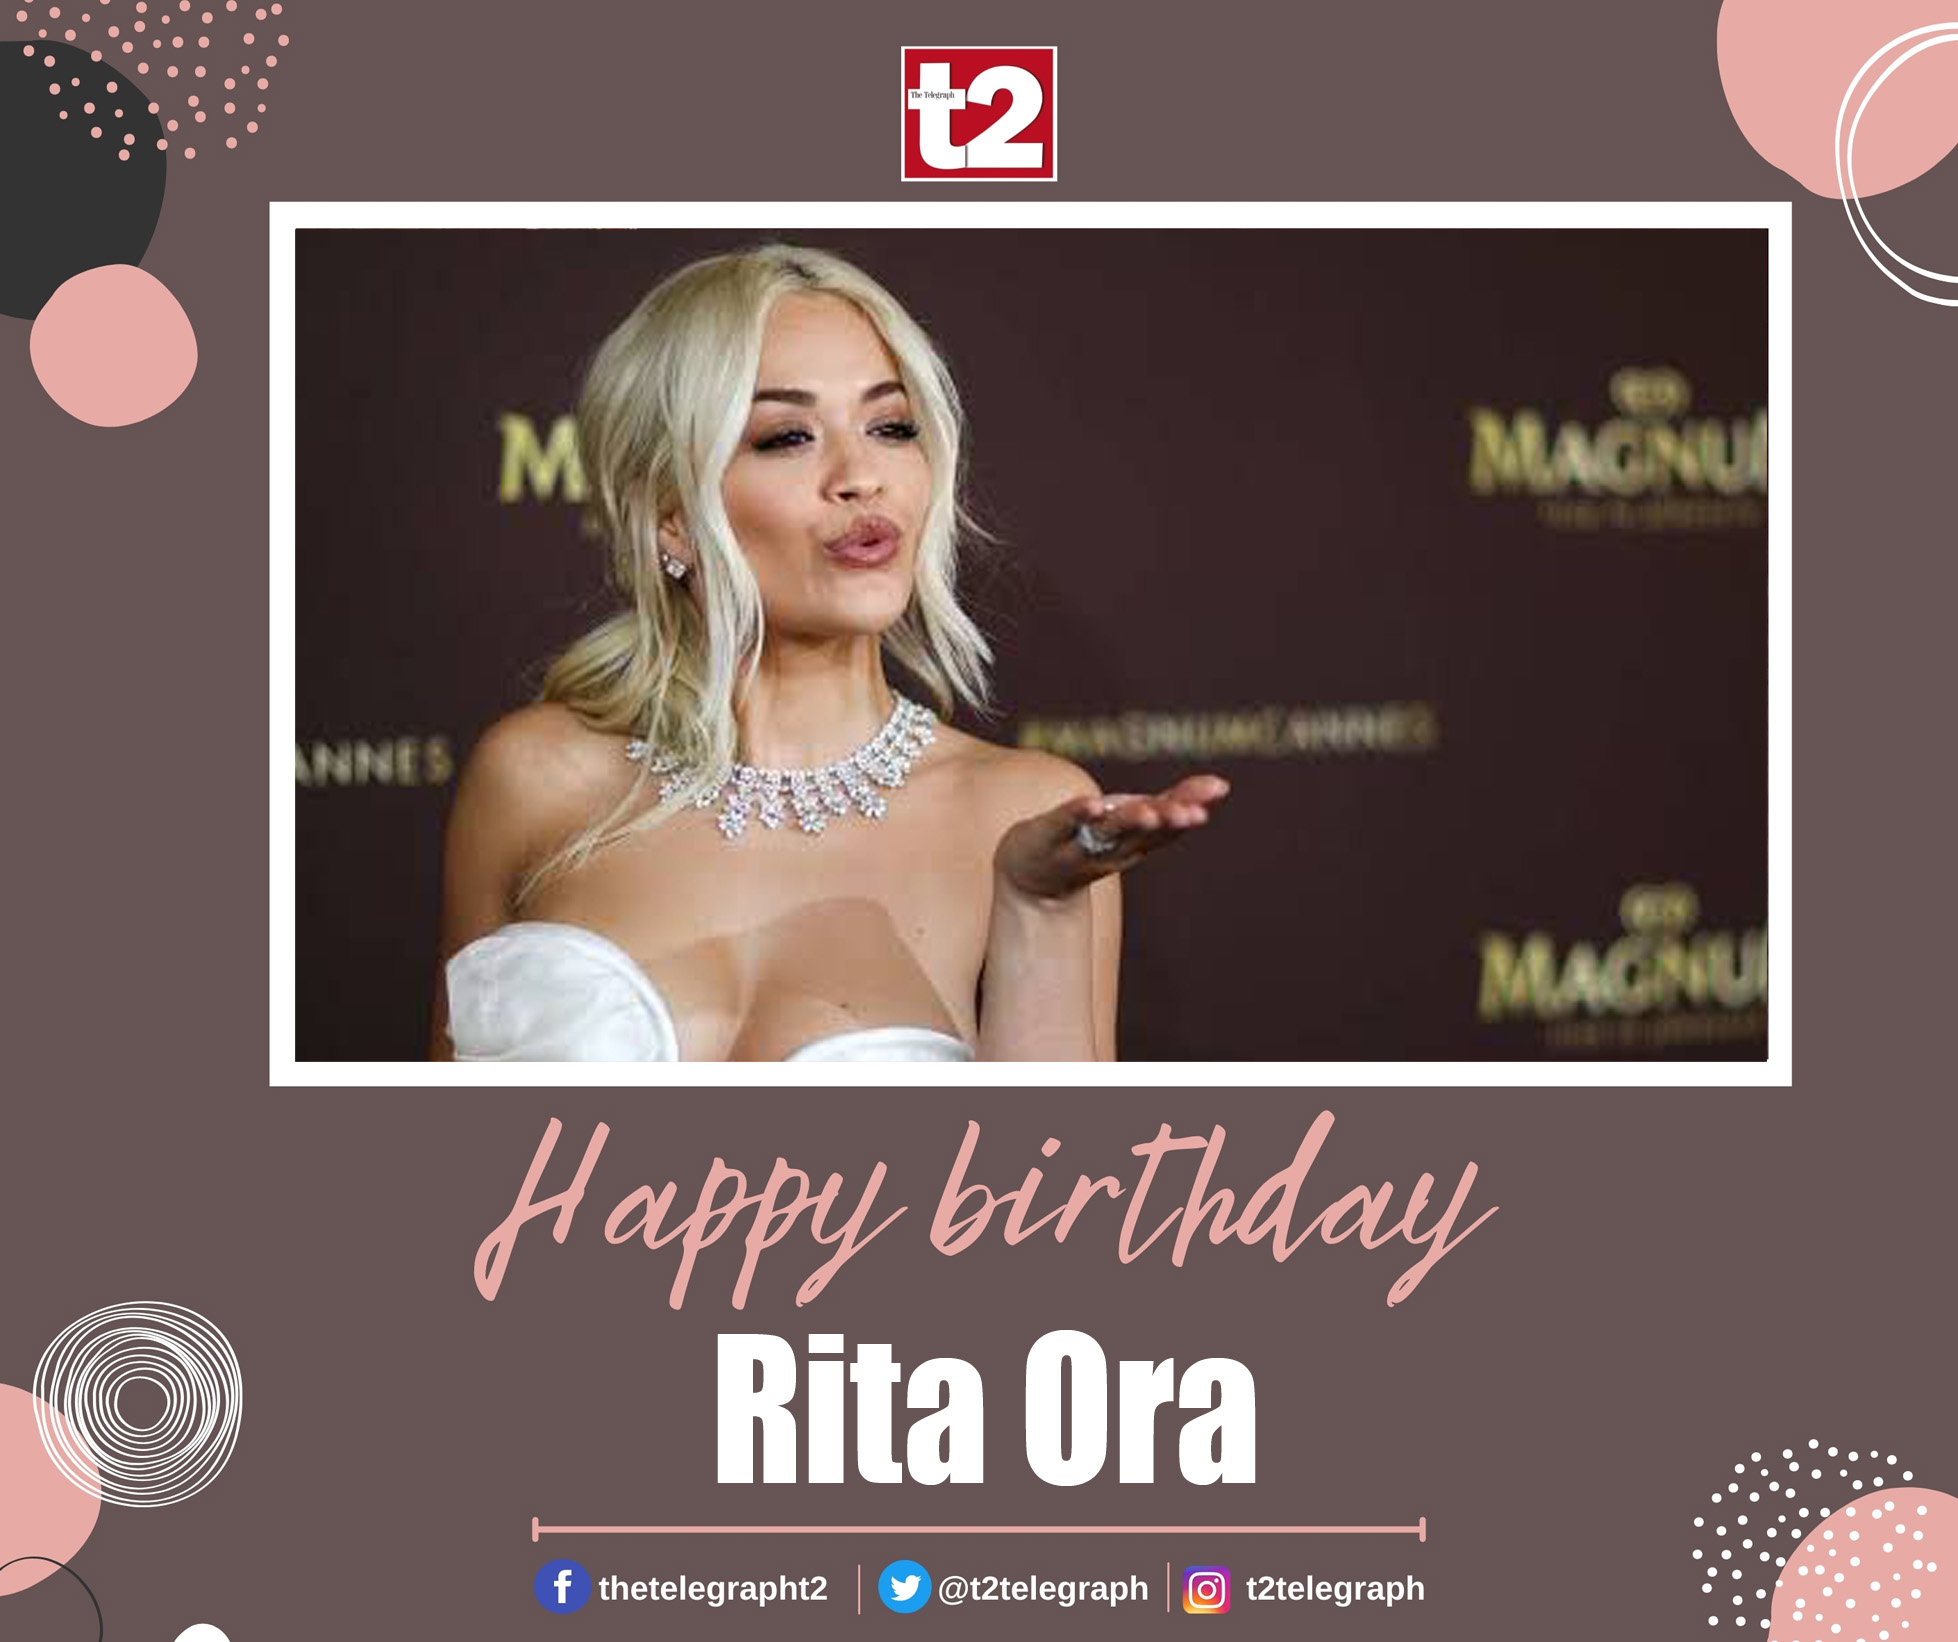 Happy birthday to the singer with high-octane vibes. Let\s raise a toast for Rita Ora 